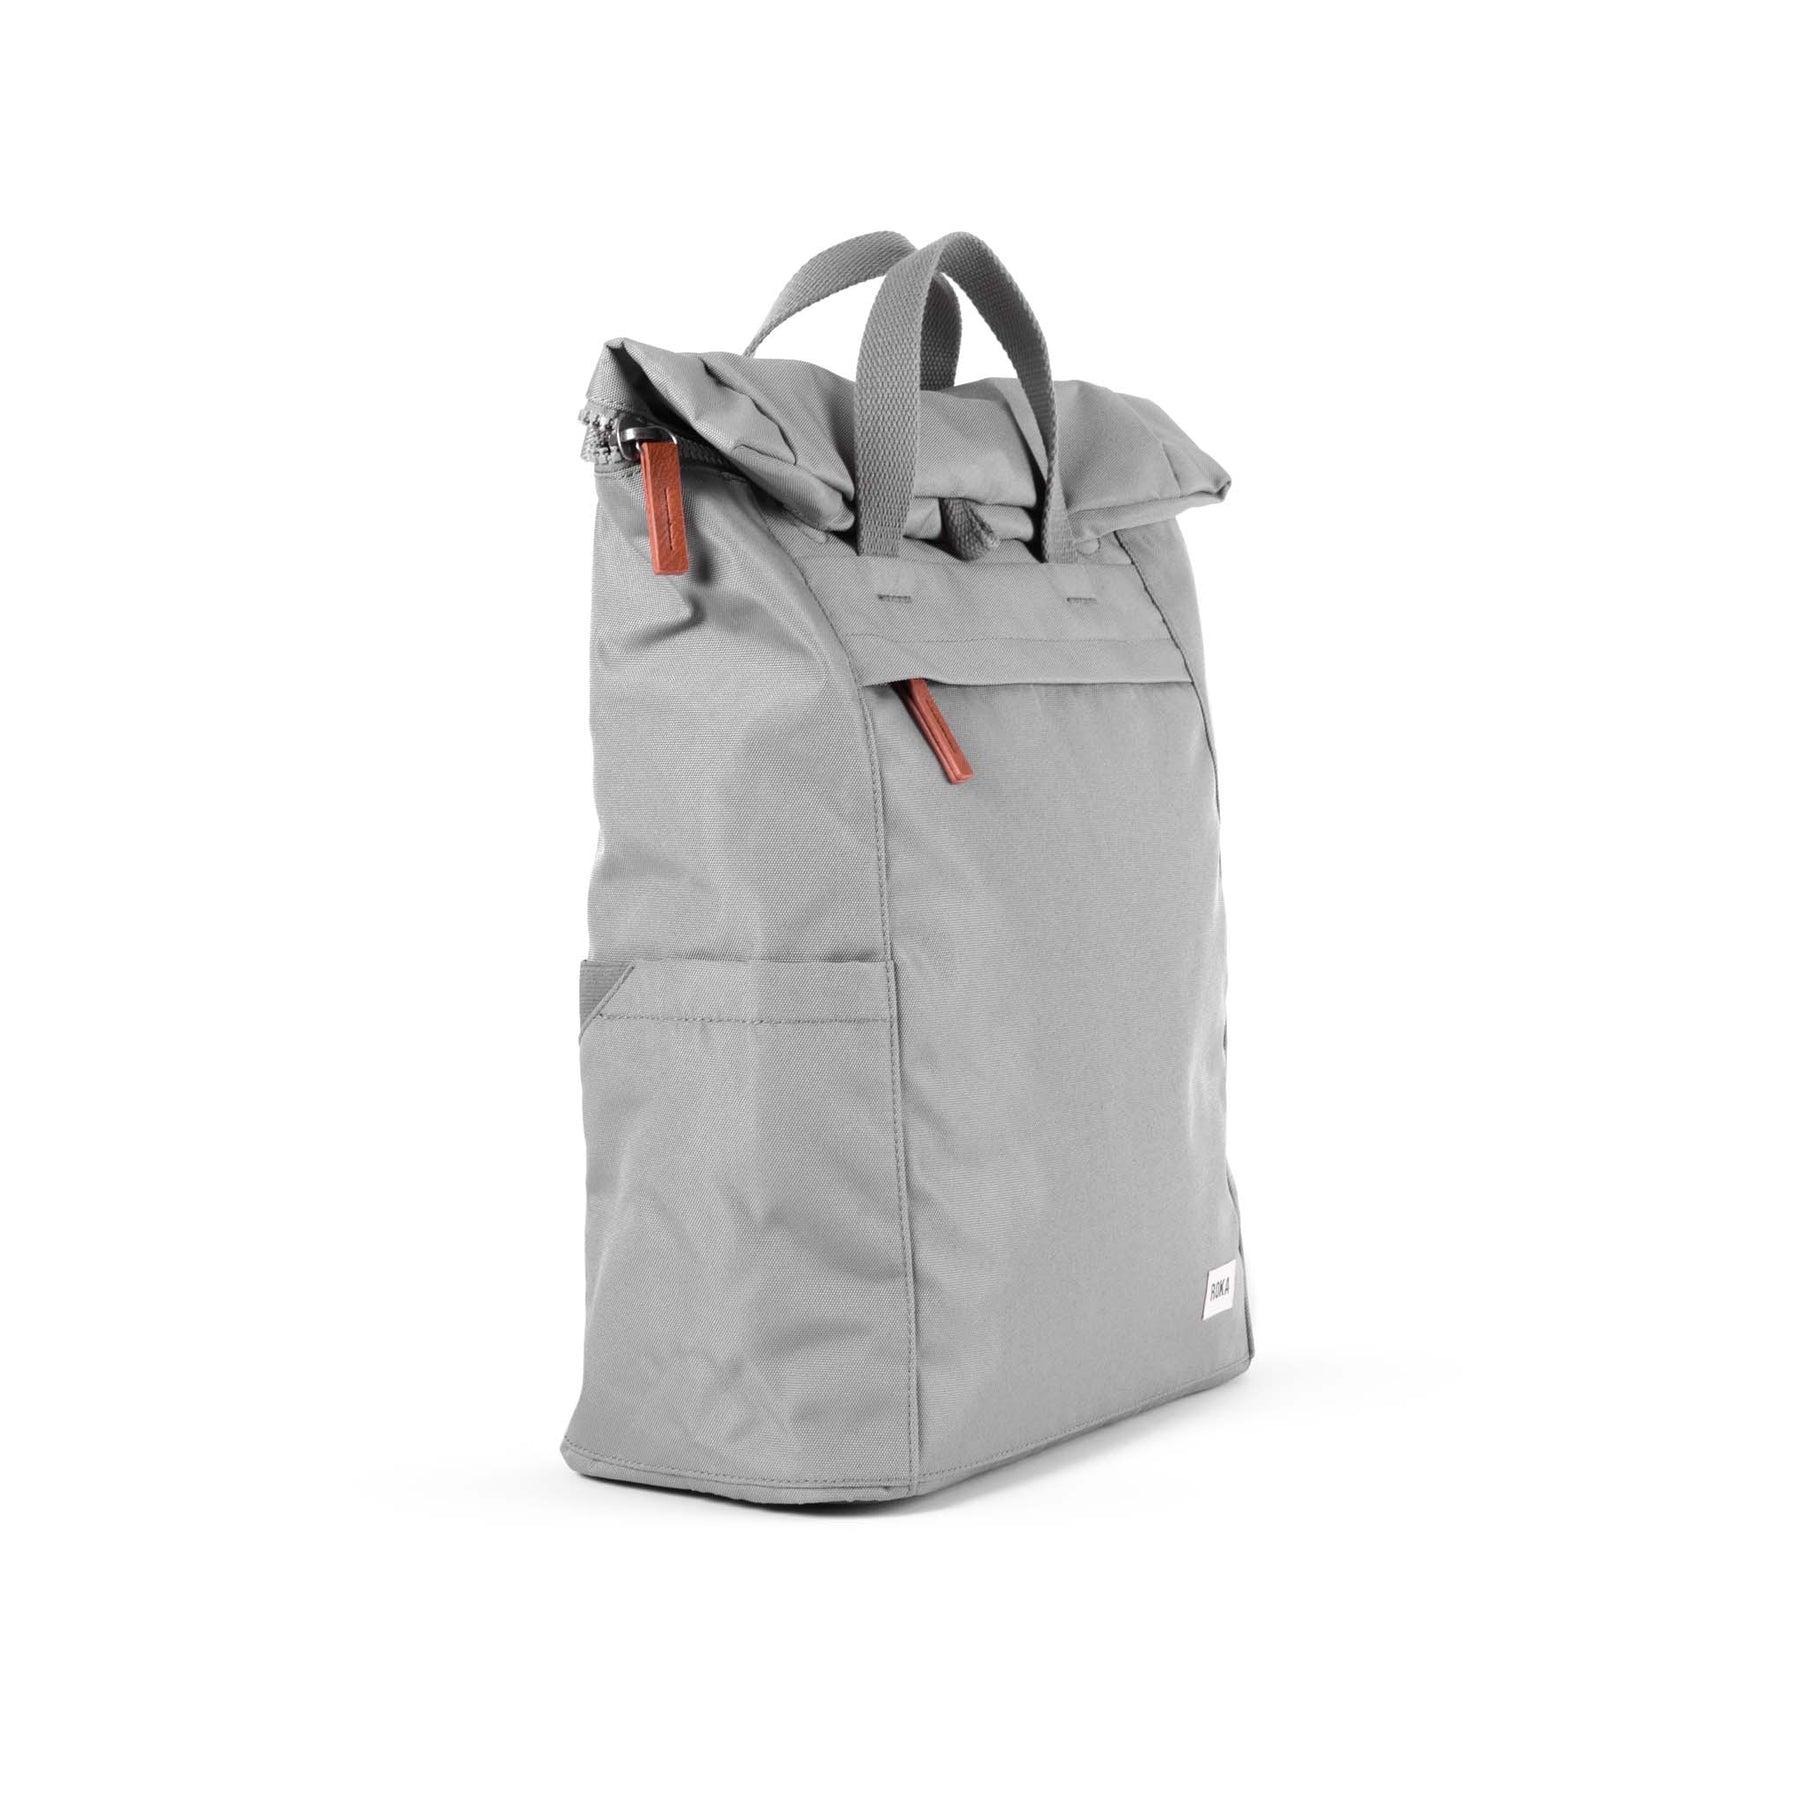 ROKA Finchley A Stormy Large Recycled Canvas Bag - OS